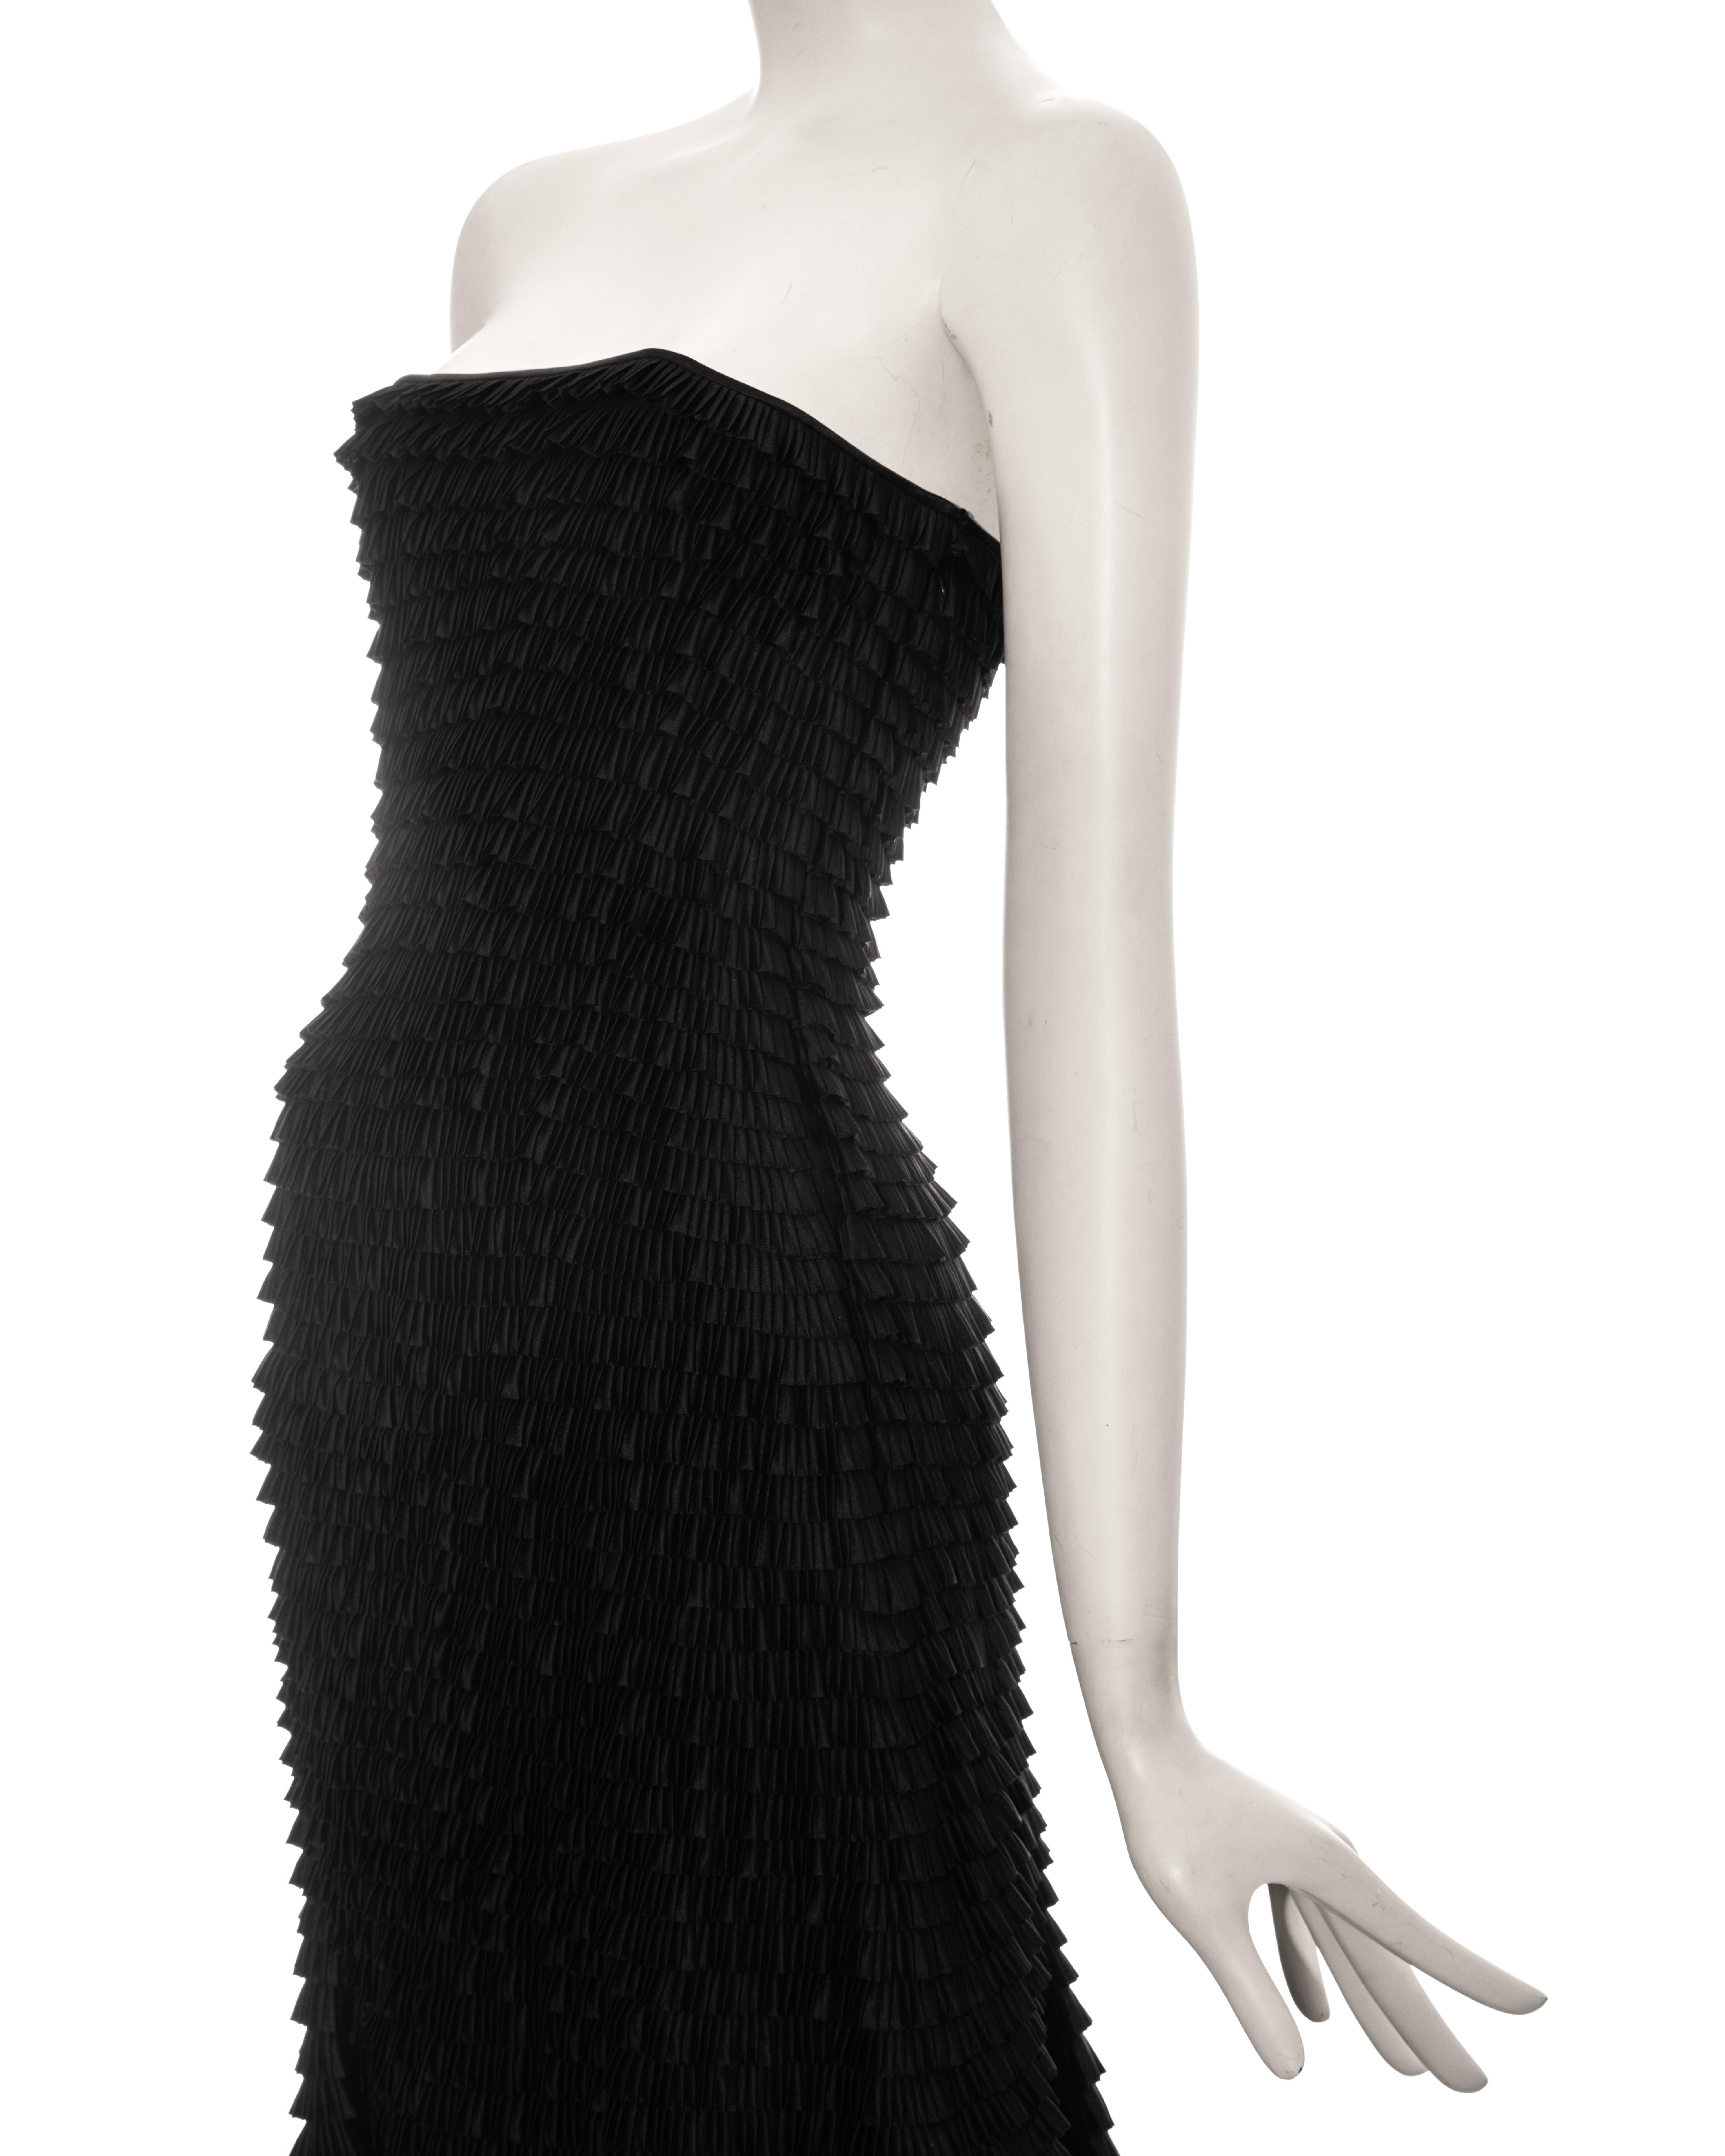 Givenchy by Alexander McQueen black ruffled fishtail evening dress, ss 1999 In Excellent Condition For Sale In London, GB